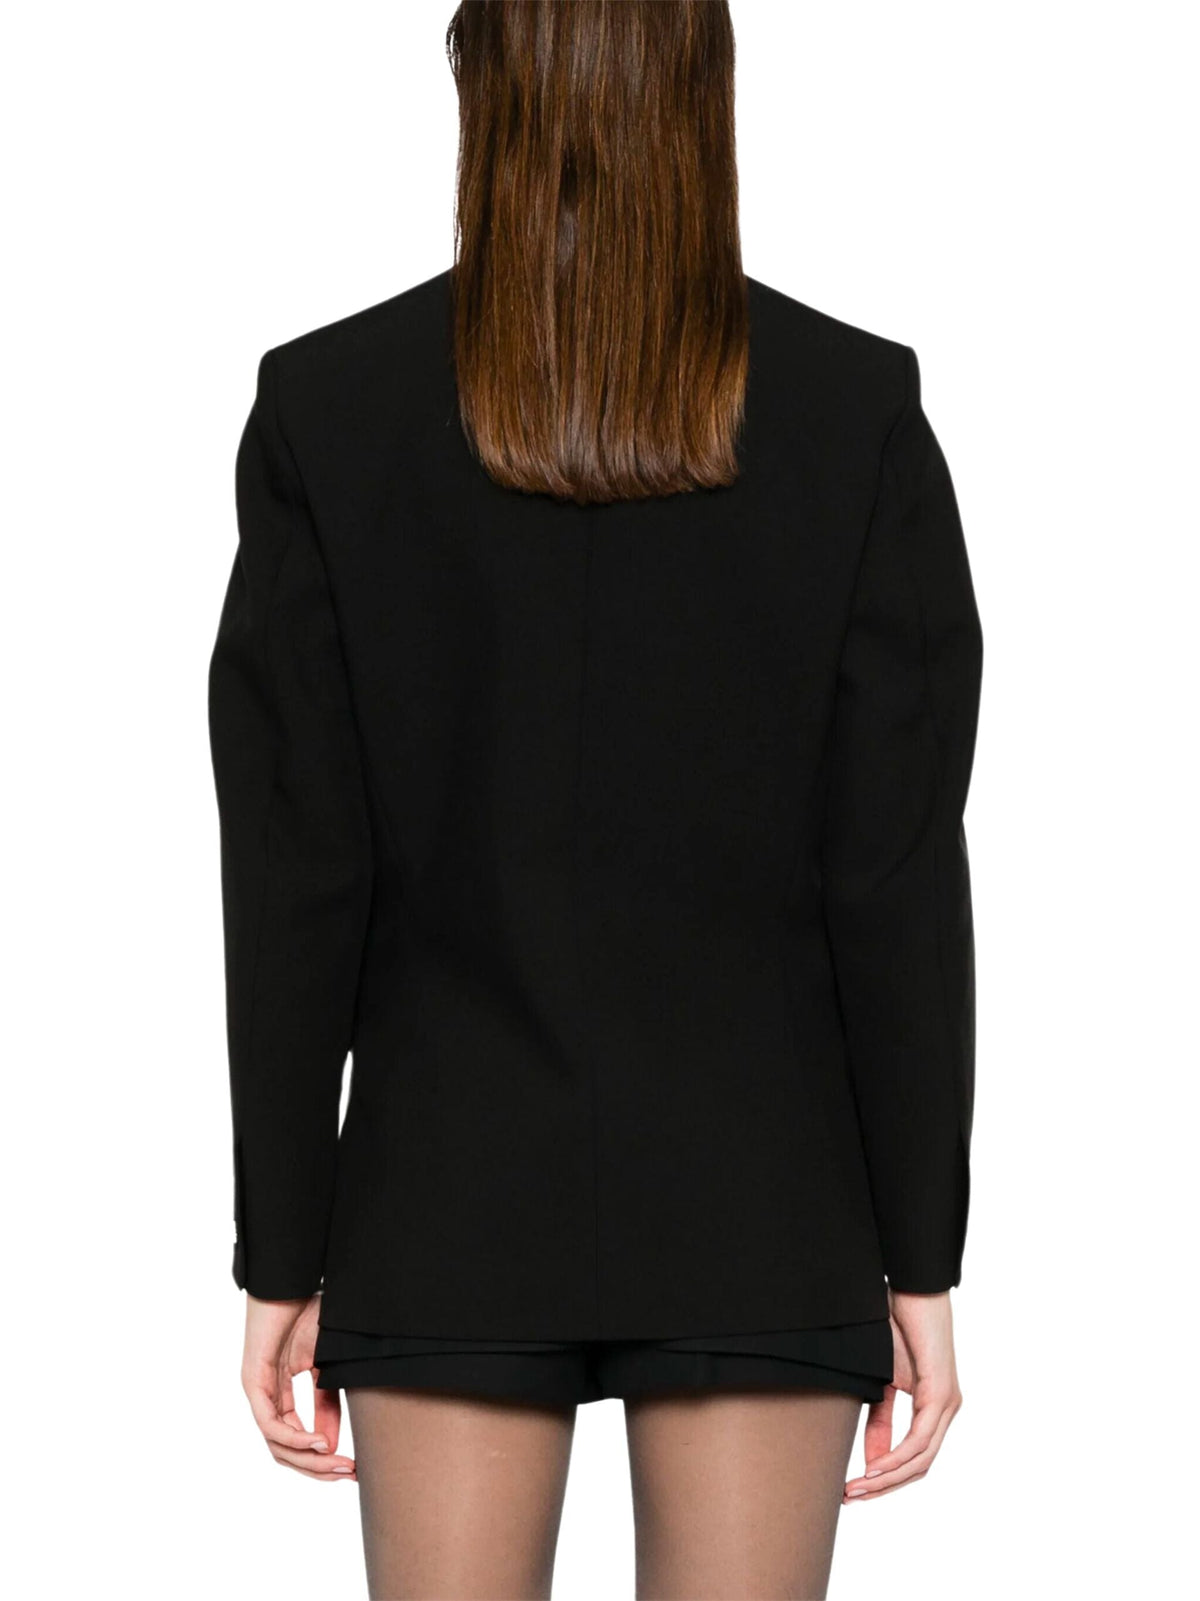 Woven Double Breasted Tailored Jacket / Black Womens Coperni 